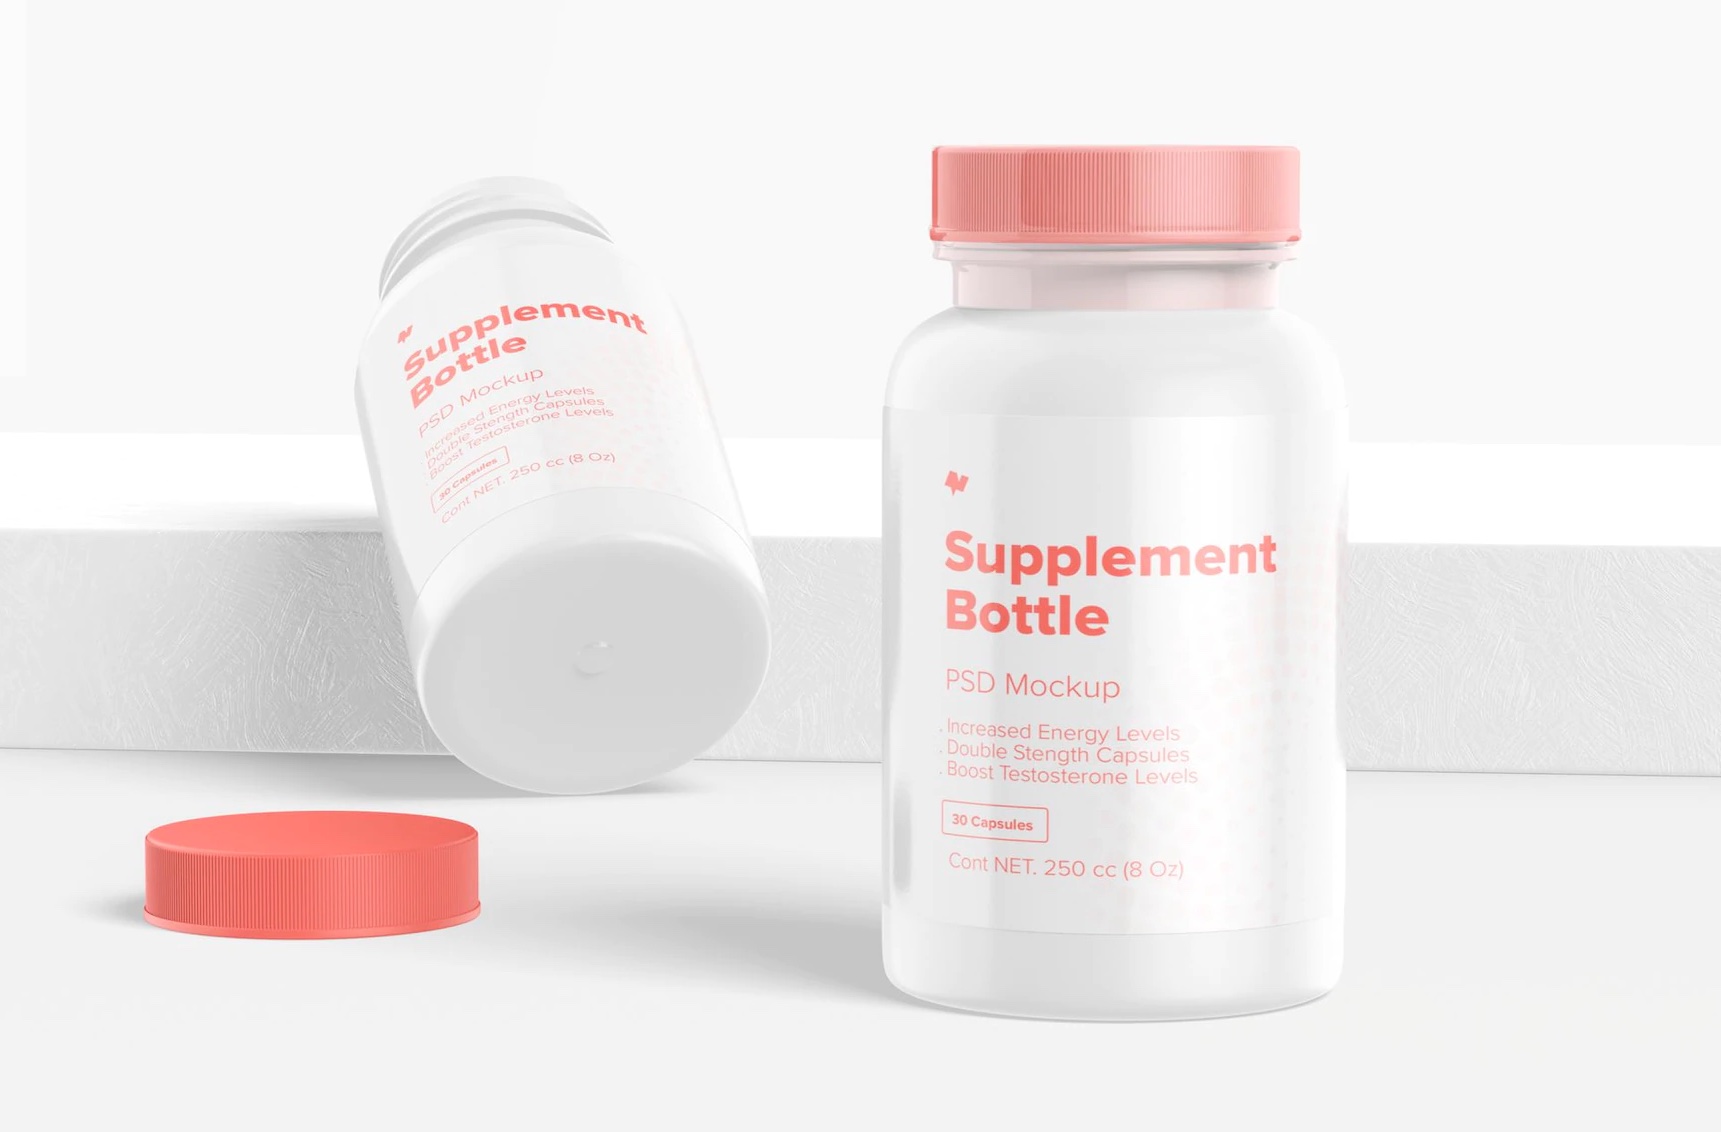 Which dietary supplement is right for me?